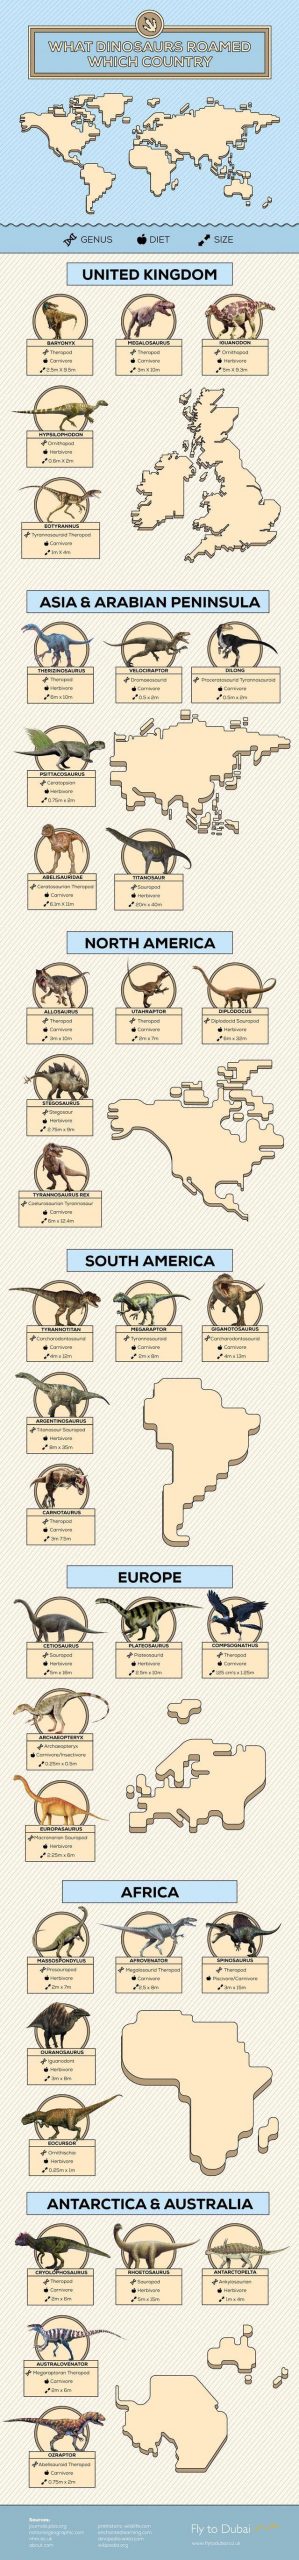 dinosaurs chart by country